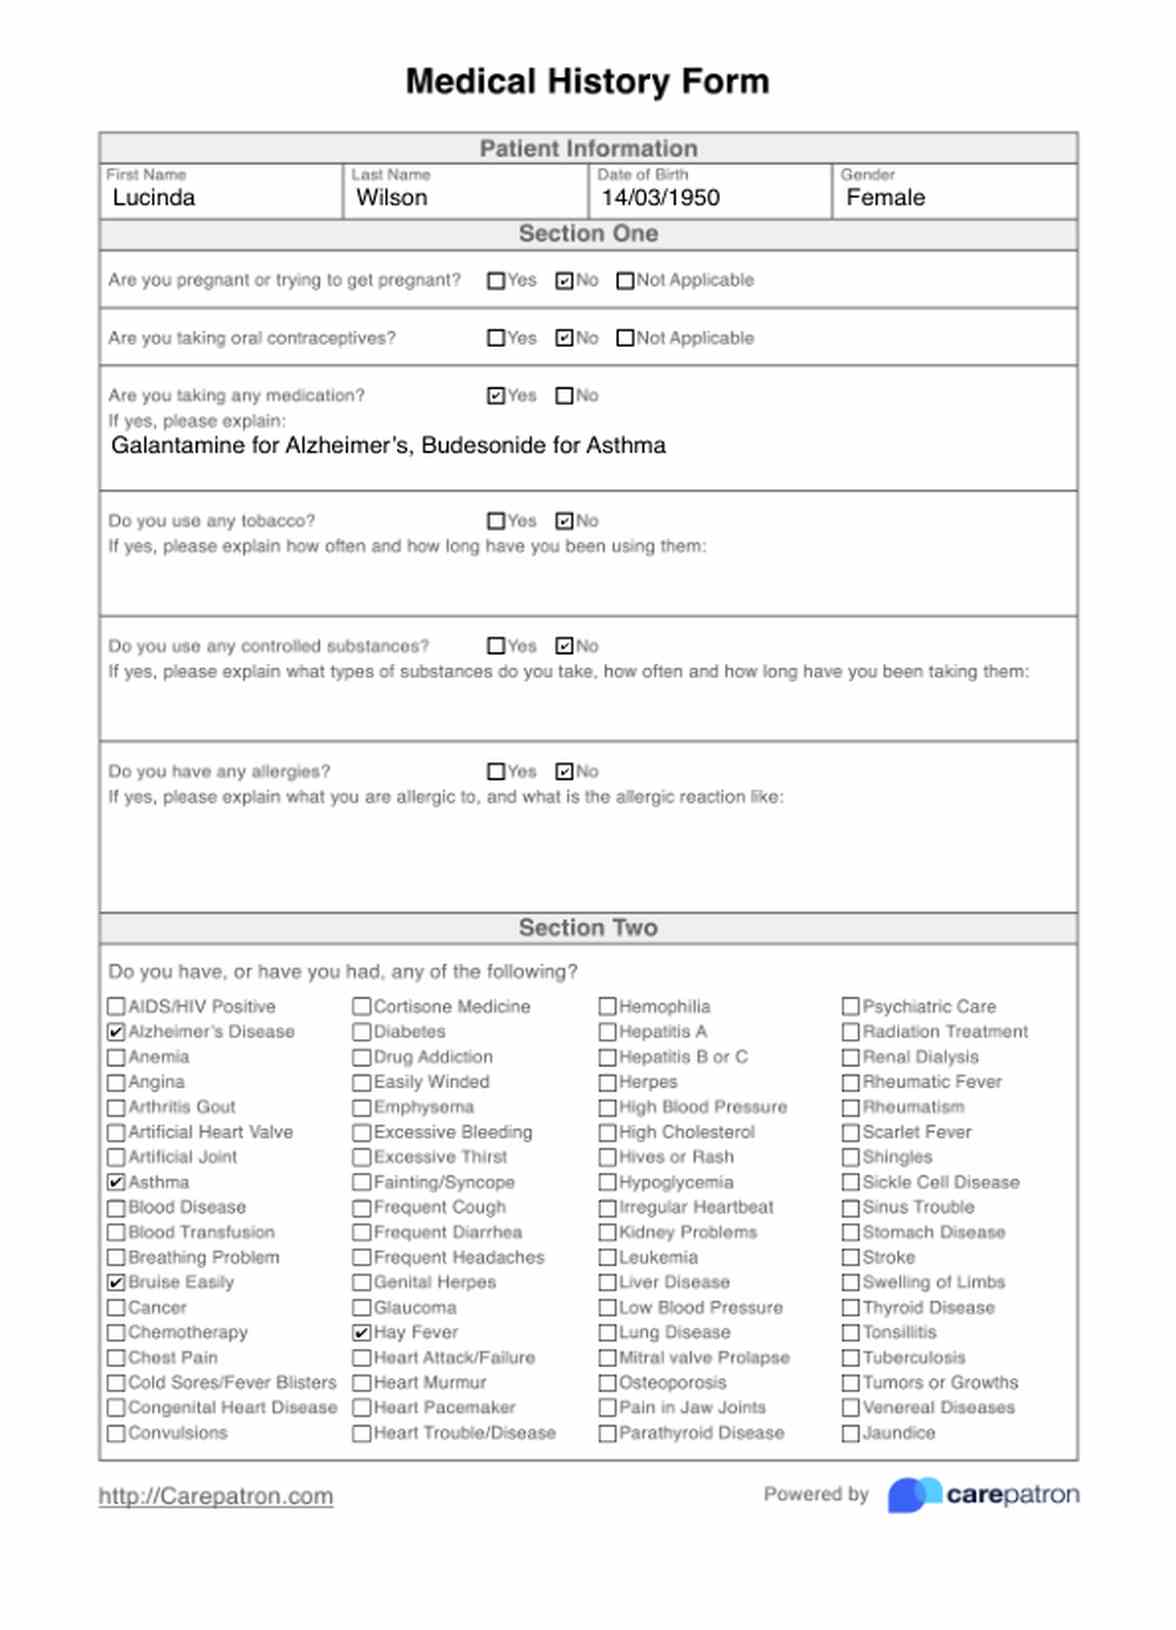 Medical History Form PDF Example